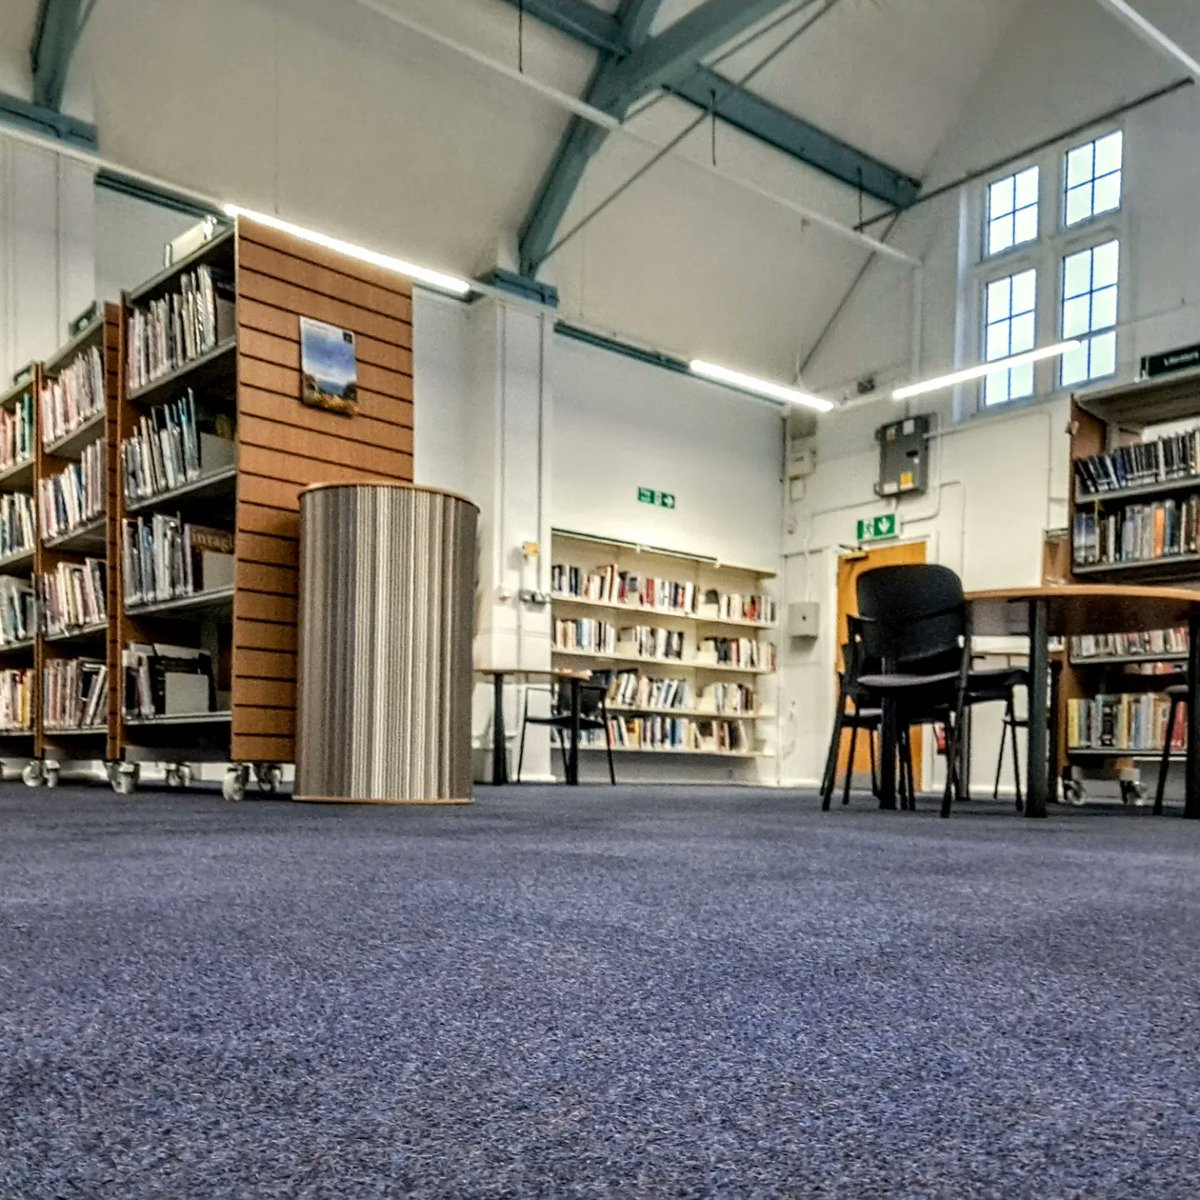 A #full #carpetclean for #stratfordlibrary yesterday. Looking #fresh and #ready for #spring

cleanoffice.co.uk 

@Warwickshire_CC #FridayFeeling #midlands #CleanUp #sanitise #office #books #librarylife #library #WCC